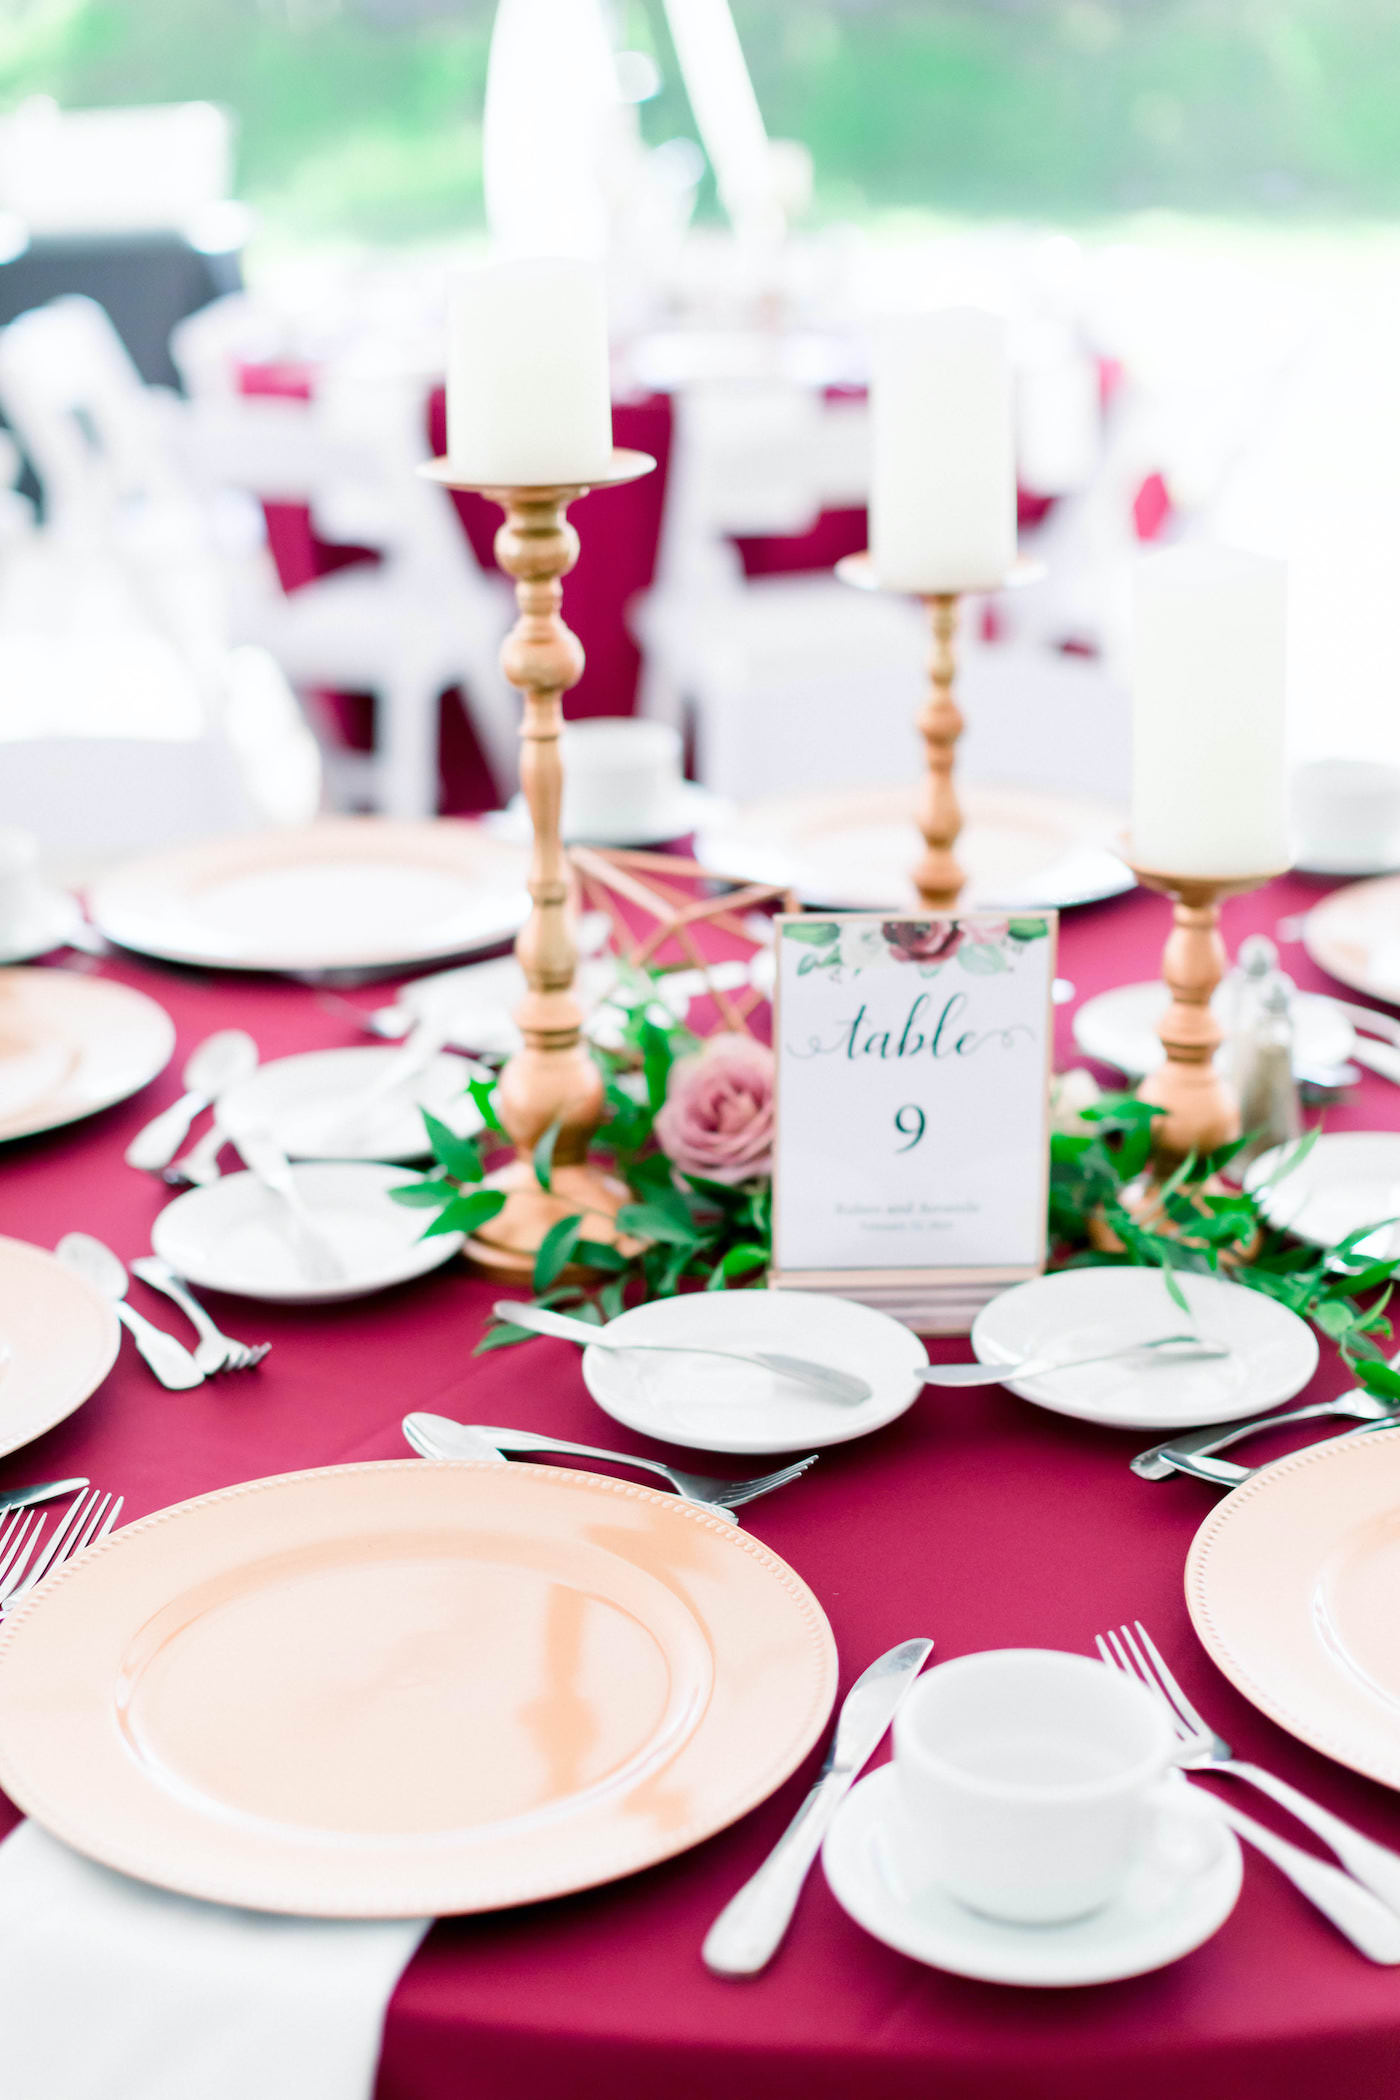 Wedding Reception Table with Burgundy Deep Red Bordeaux Table Linens with Gold Charger Plates and Gold Candlestick Centerpieces accented with Ruscus Greenery